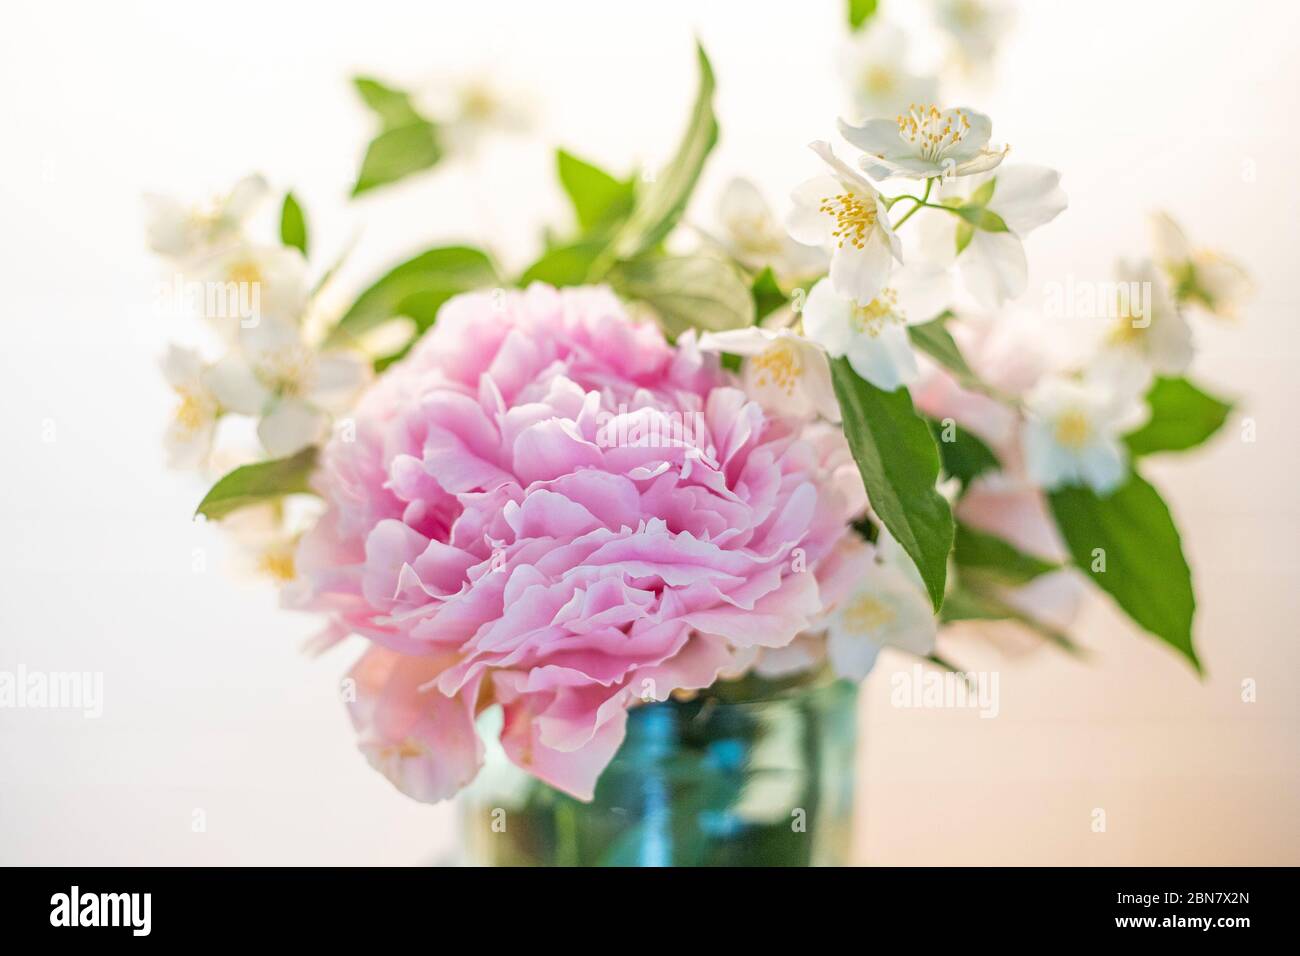 Flowers bouquet with peony (paeonia) and mock- orange (philadelphus), spring plants. Pink and white background, close-up. Stock Photo